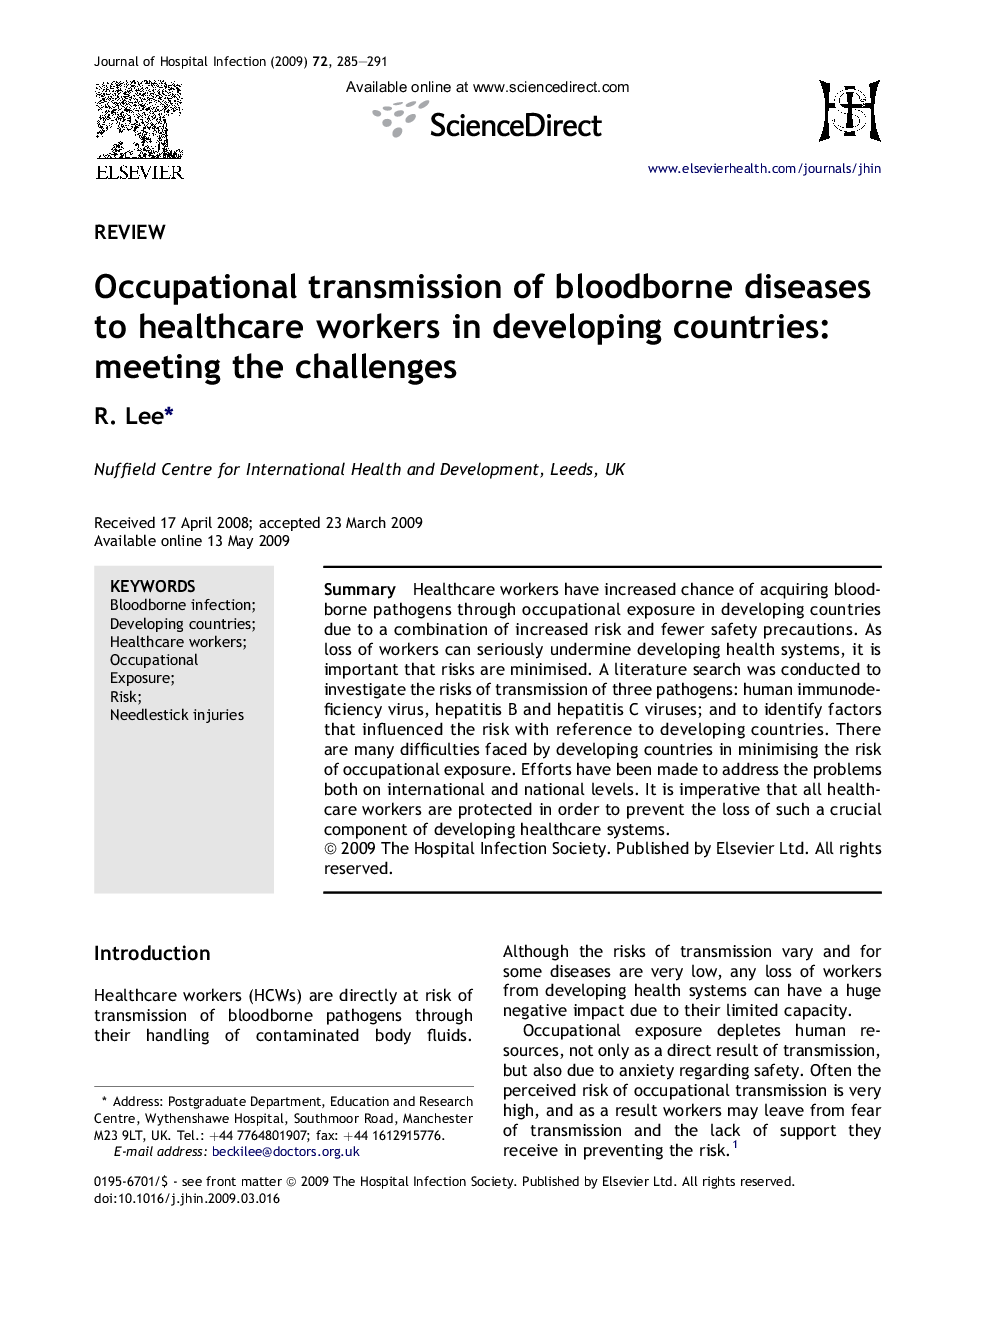 Occupational transmission of bloodborne diseases to healthcare workers in developing countries: meeting the challenges